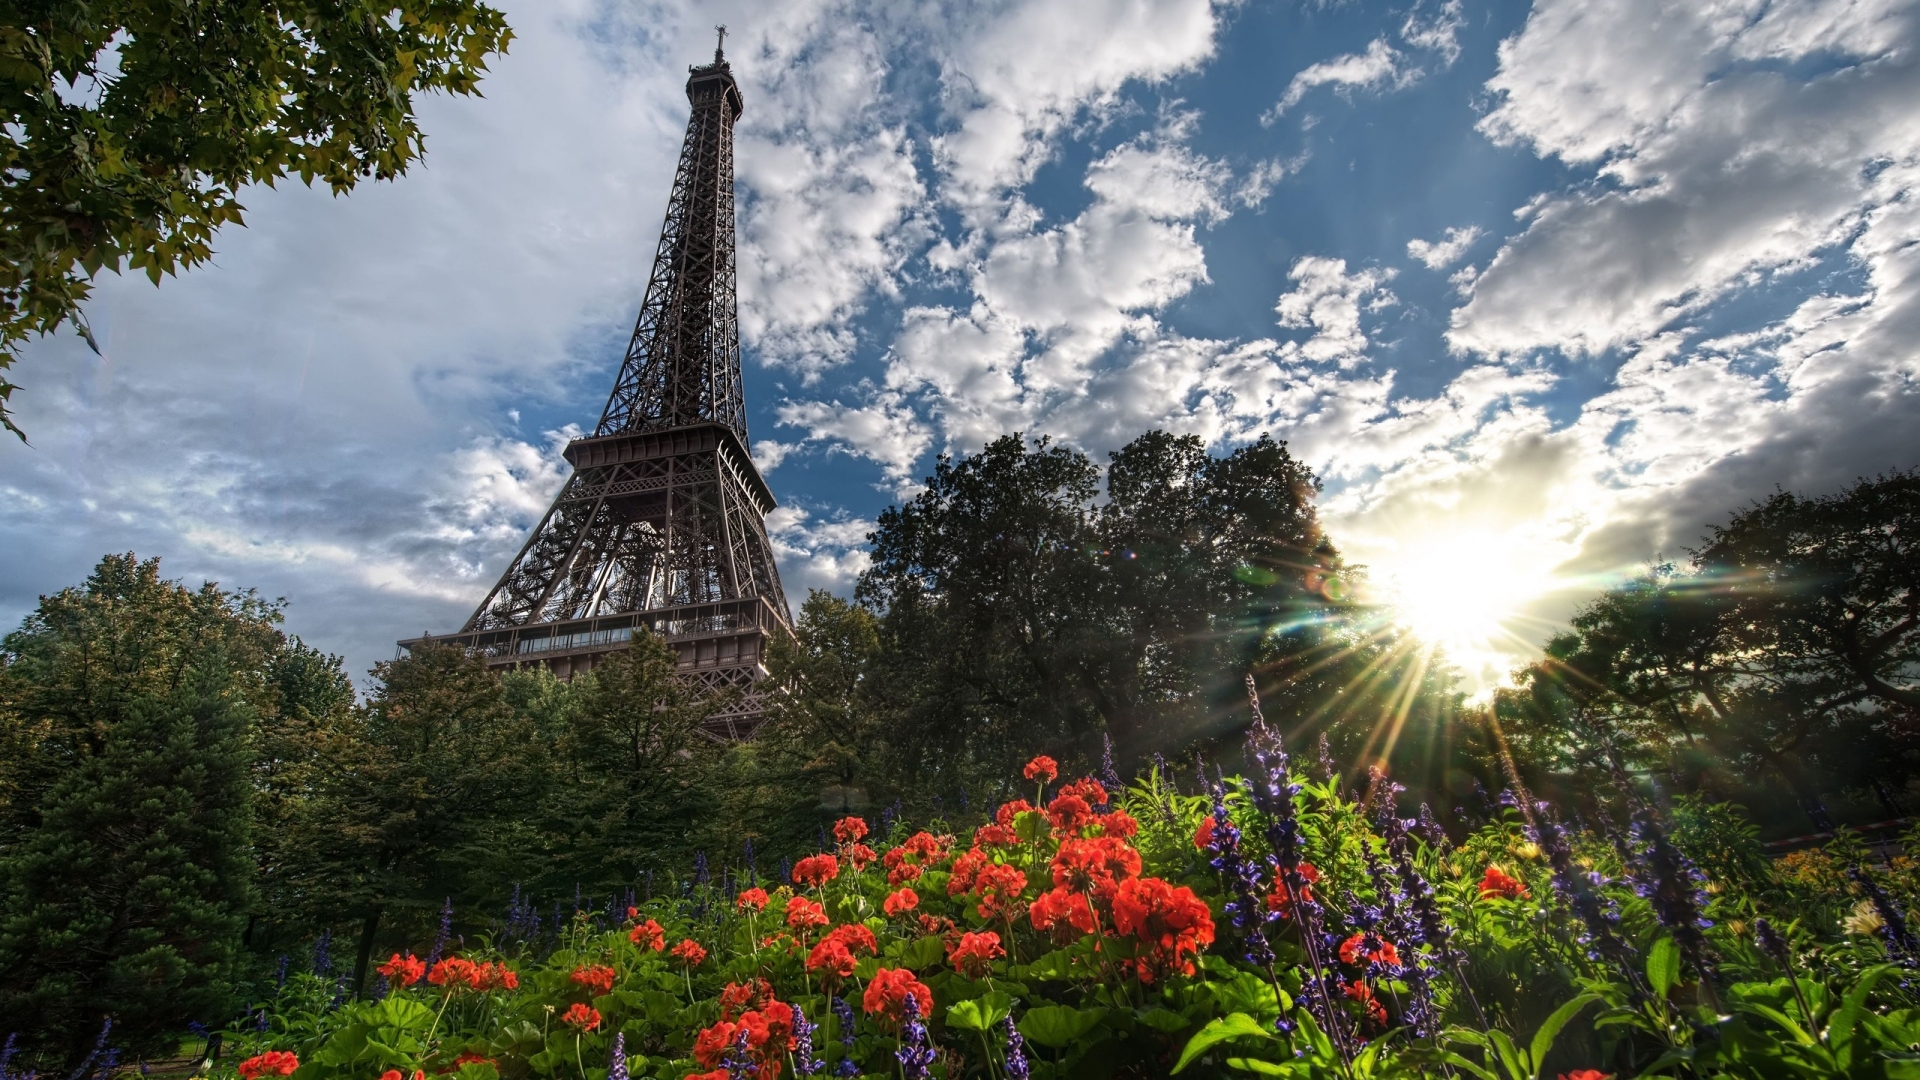 Eiffel Tower Surrounded by Flowers for 1920 x 1080 HDTV 1080p resolution